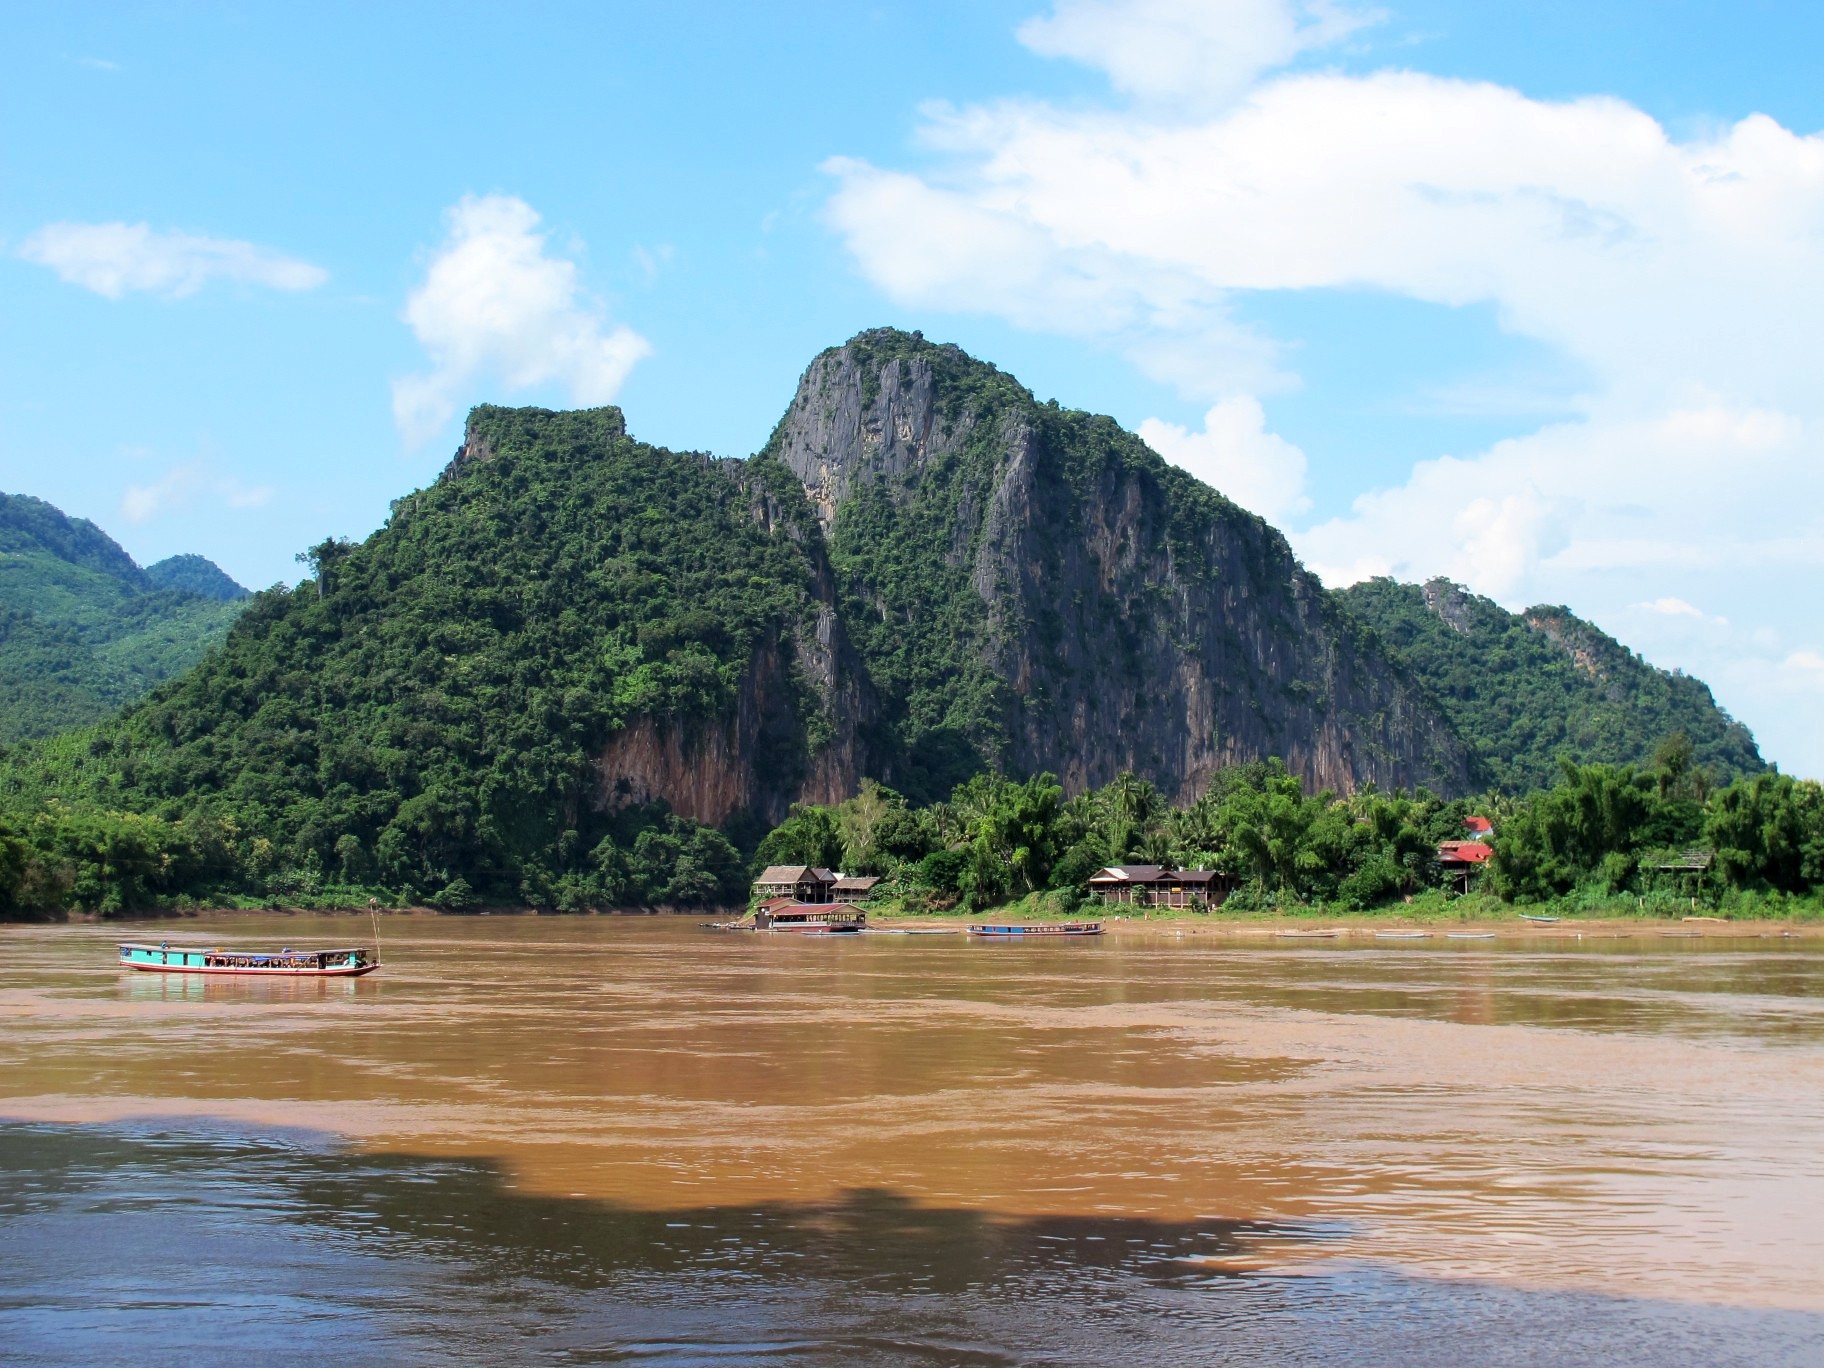 Two days on the Mekong River